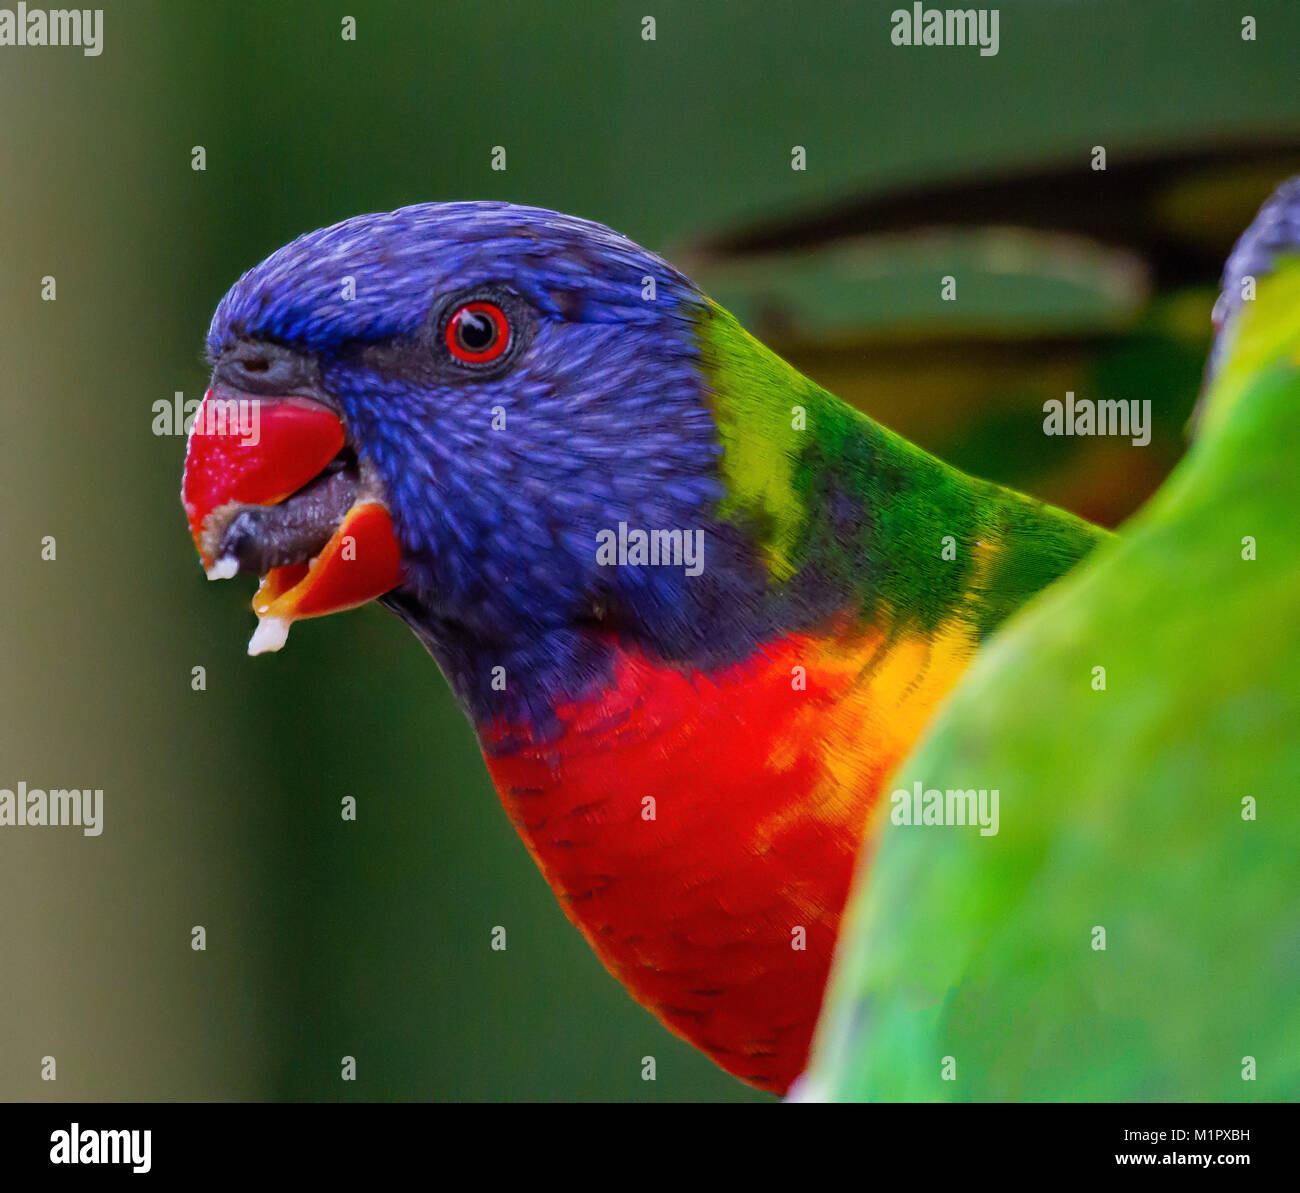 Rainbow lorikeet in profile with tongue visible sitting behind another bird which has its back turned. Some food is visible on the tip of its beak. Stock Photo